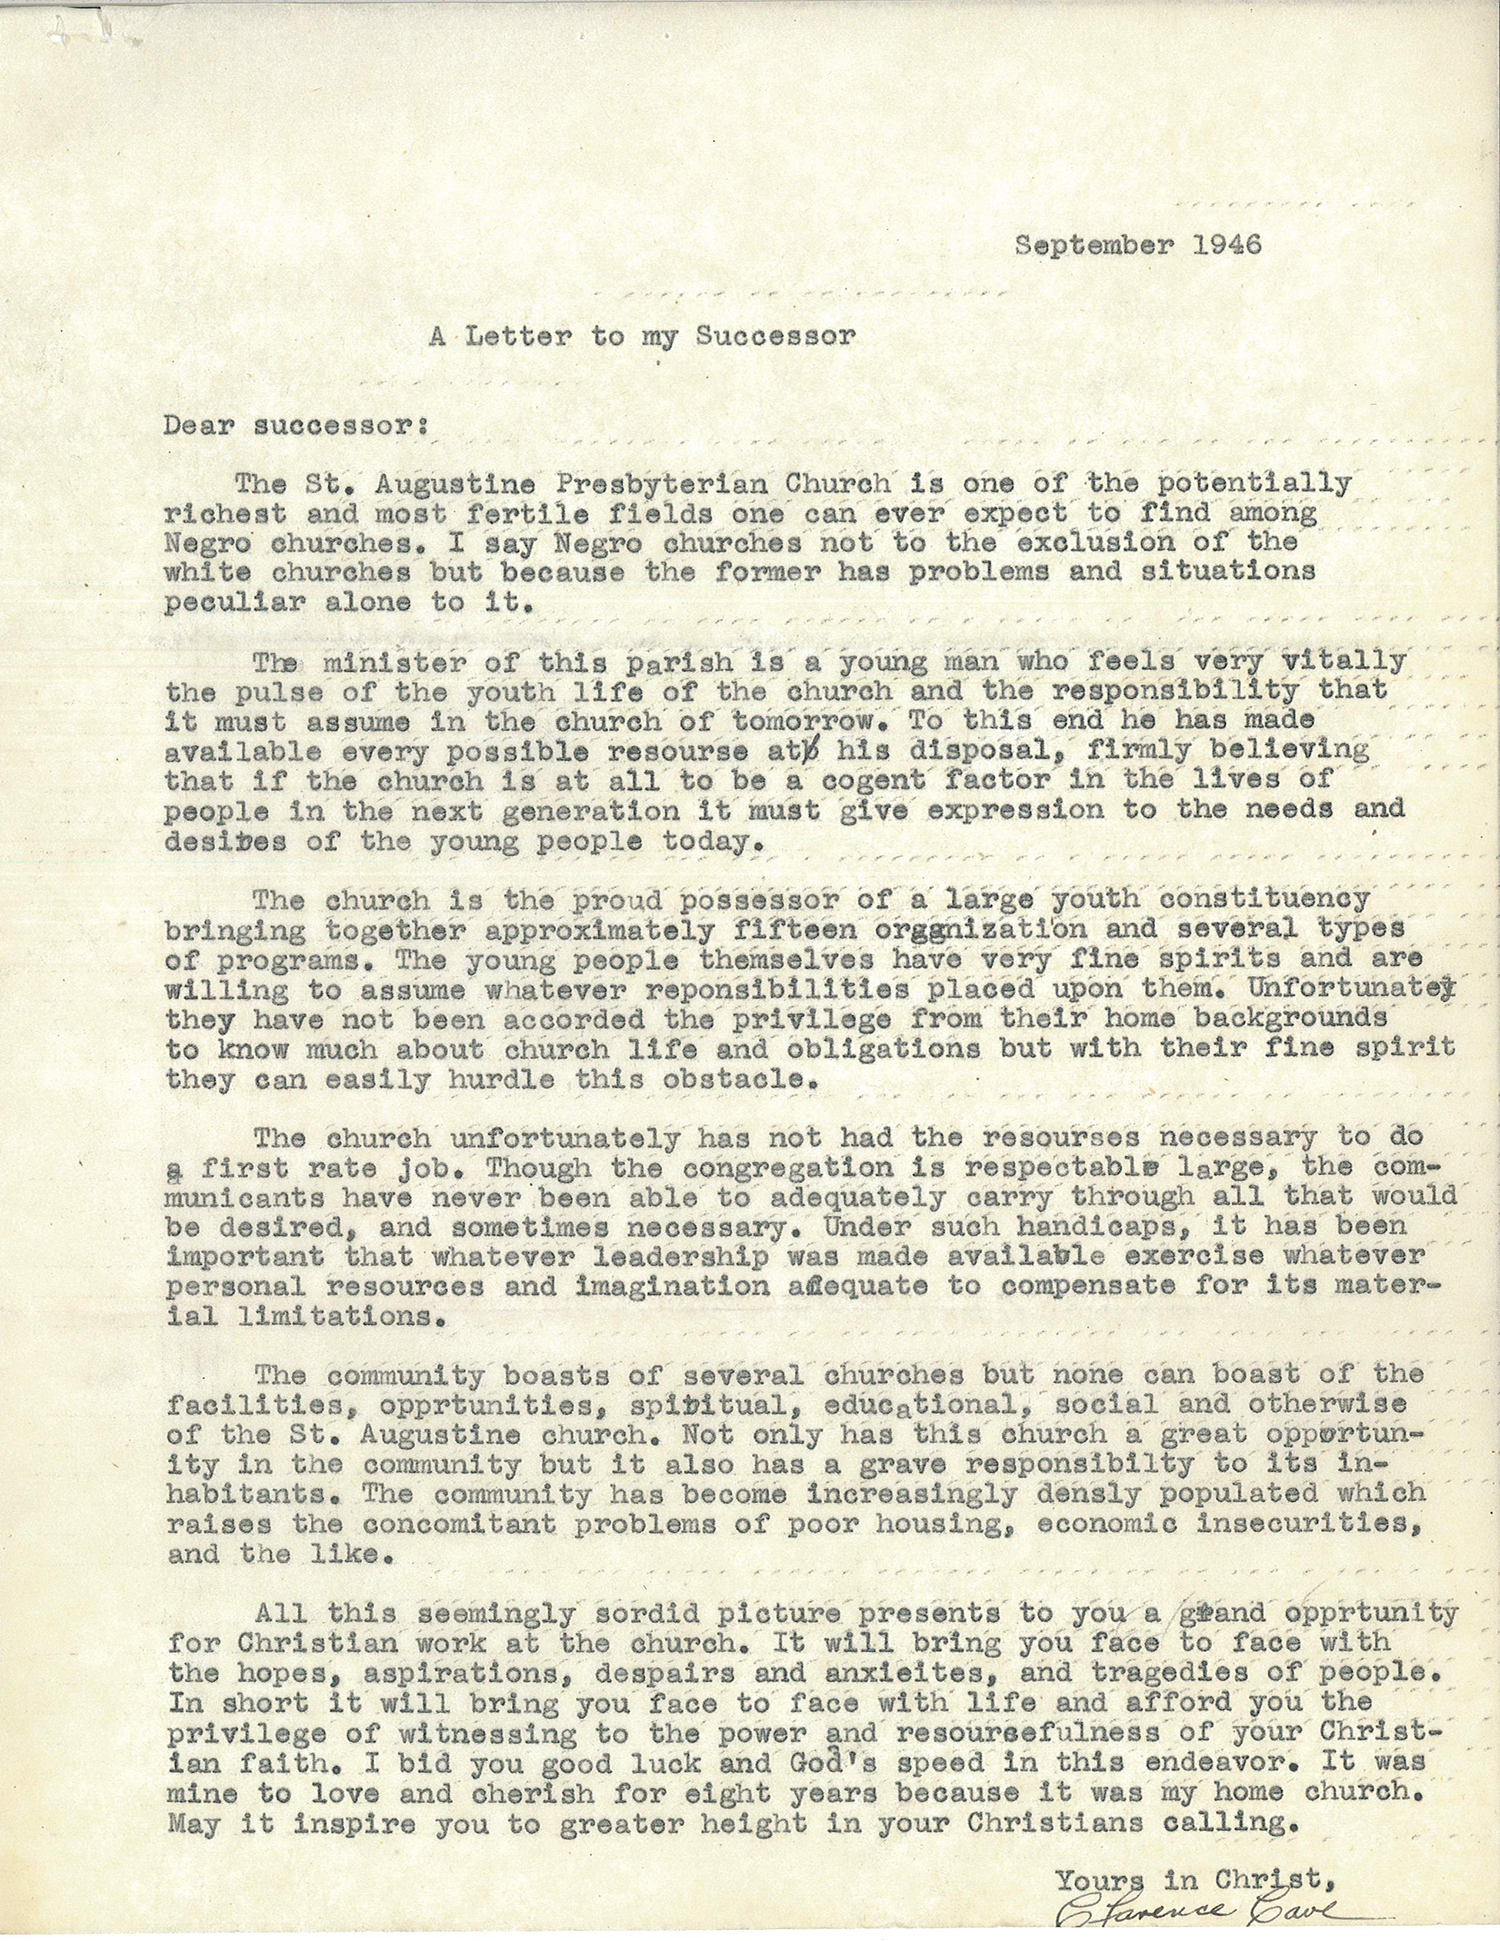 Clarence Cave's Letter to my Successor at St. Augustine Presbyterian Church, 1948. From RG 425. 